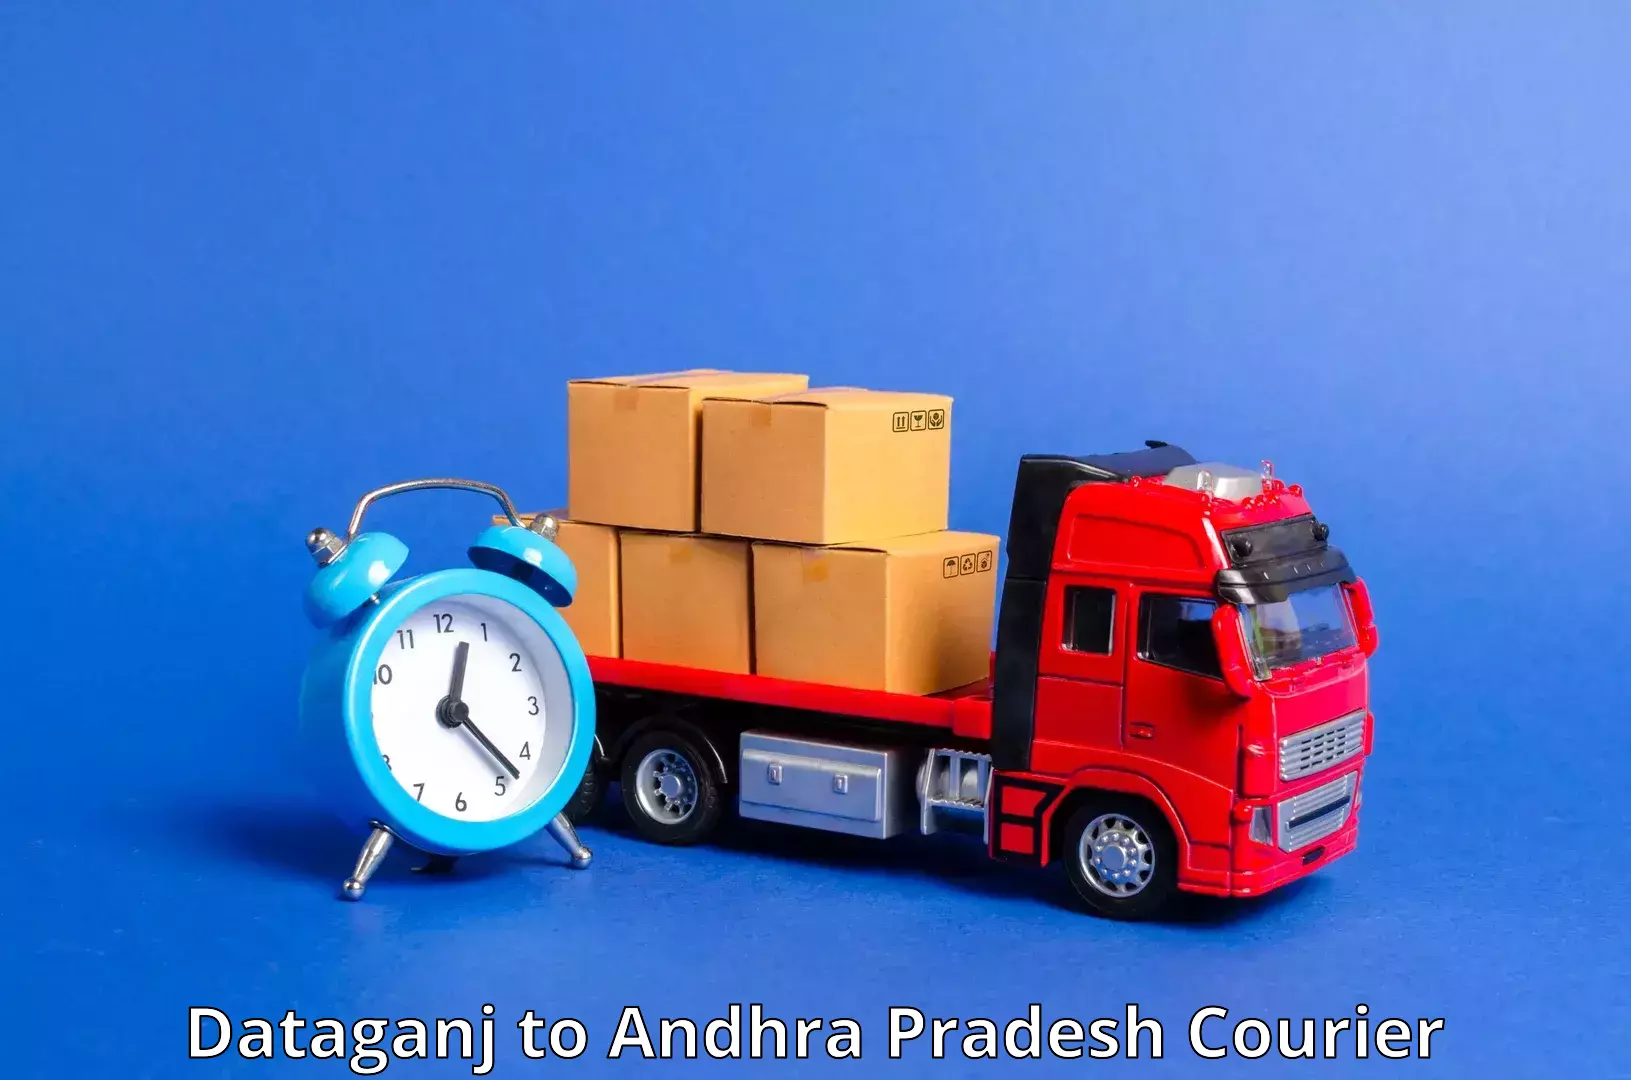 User-friendly delivery service Dataganj to Gopalapatnam